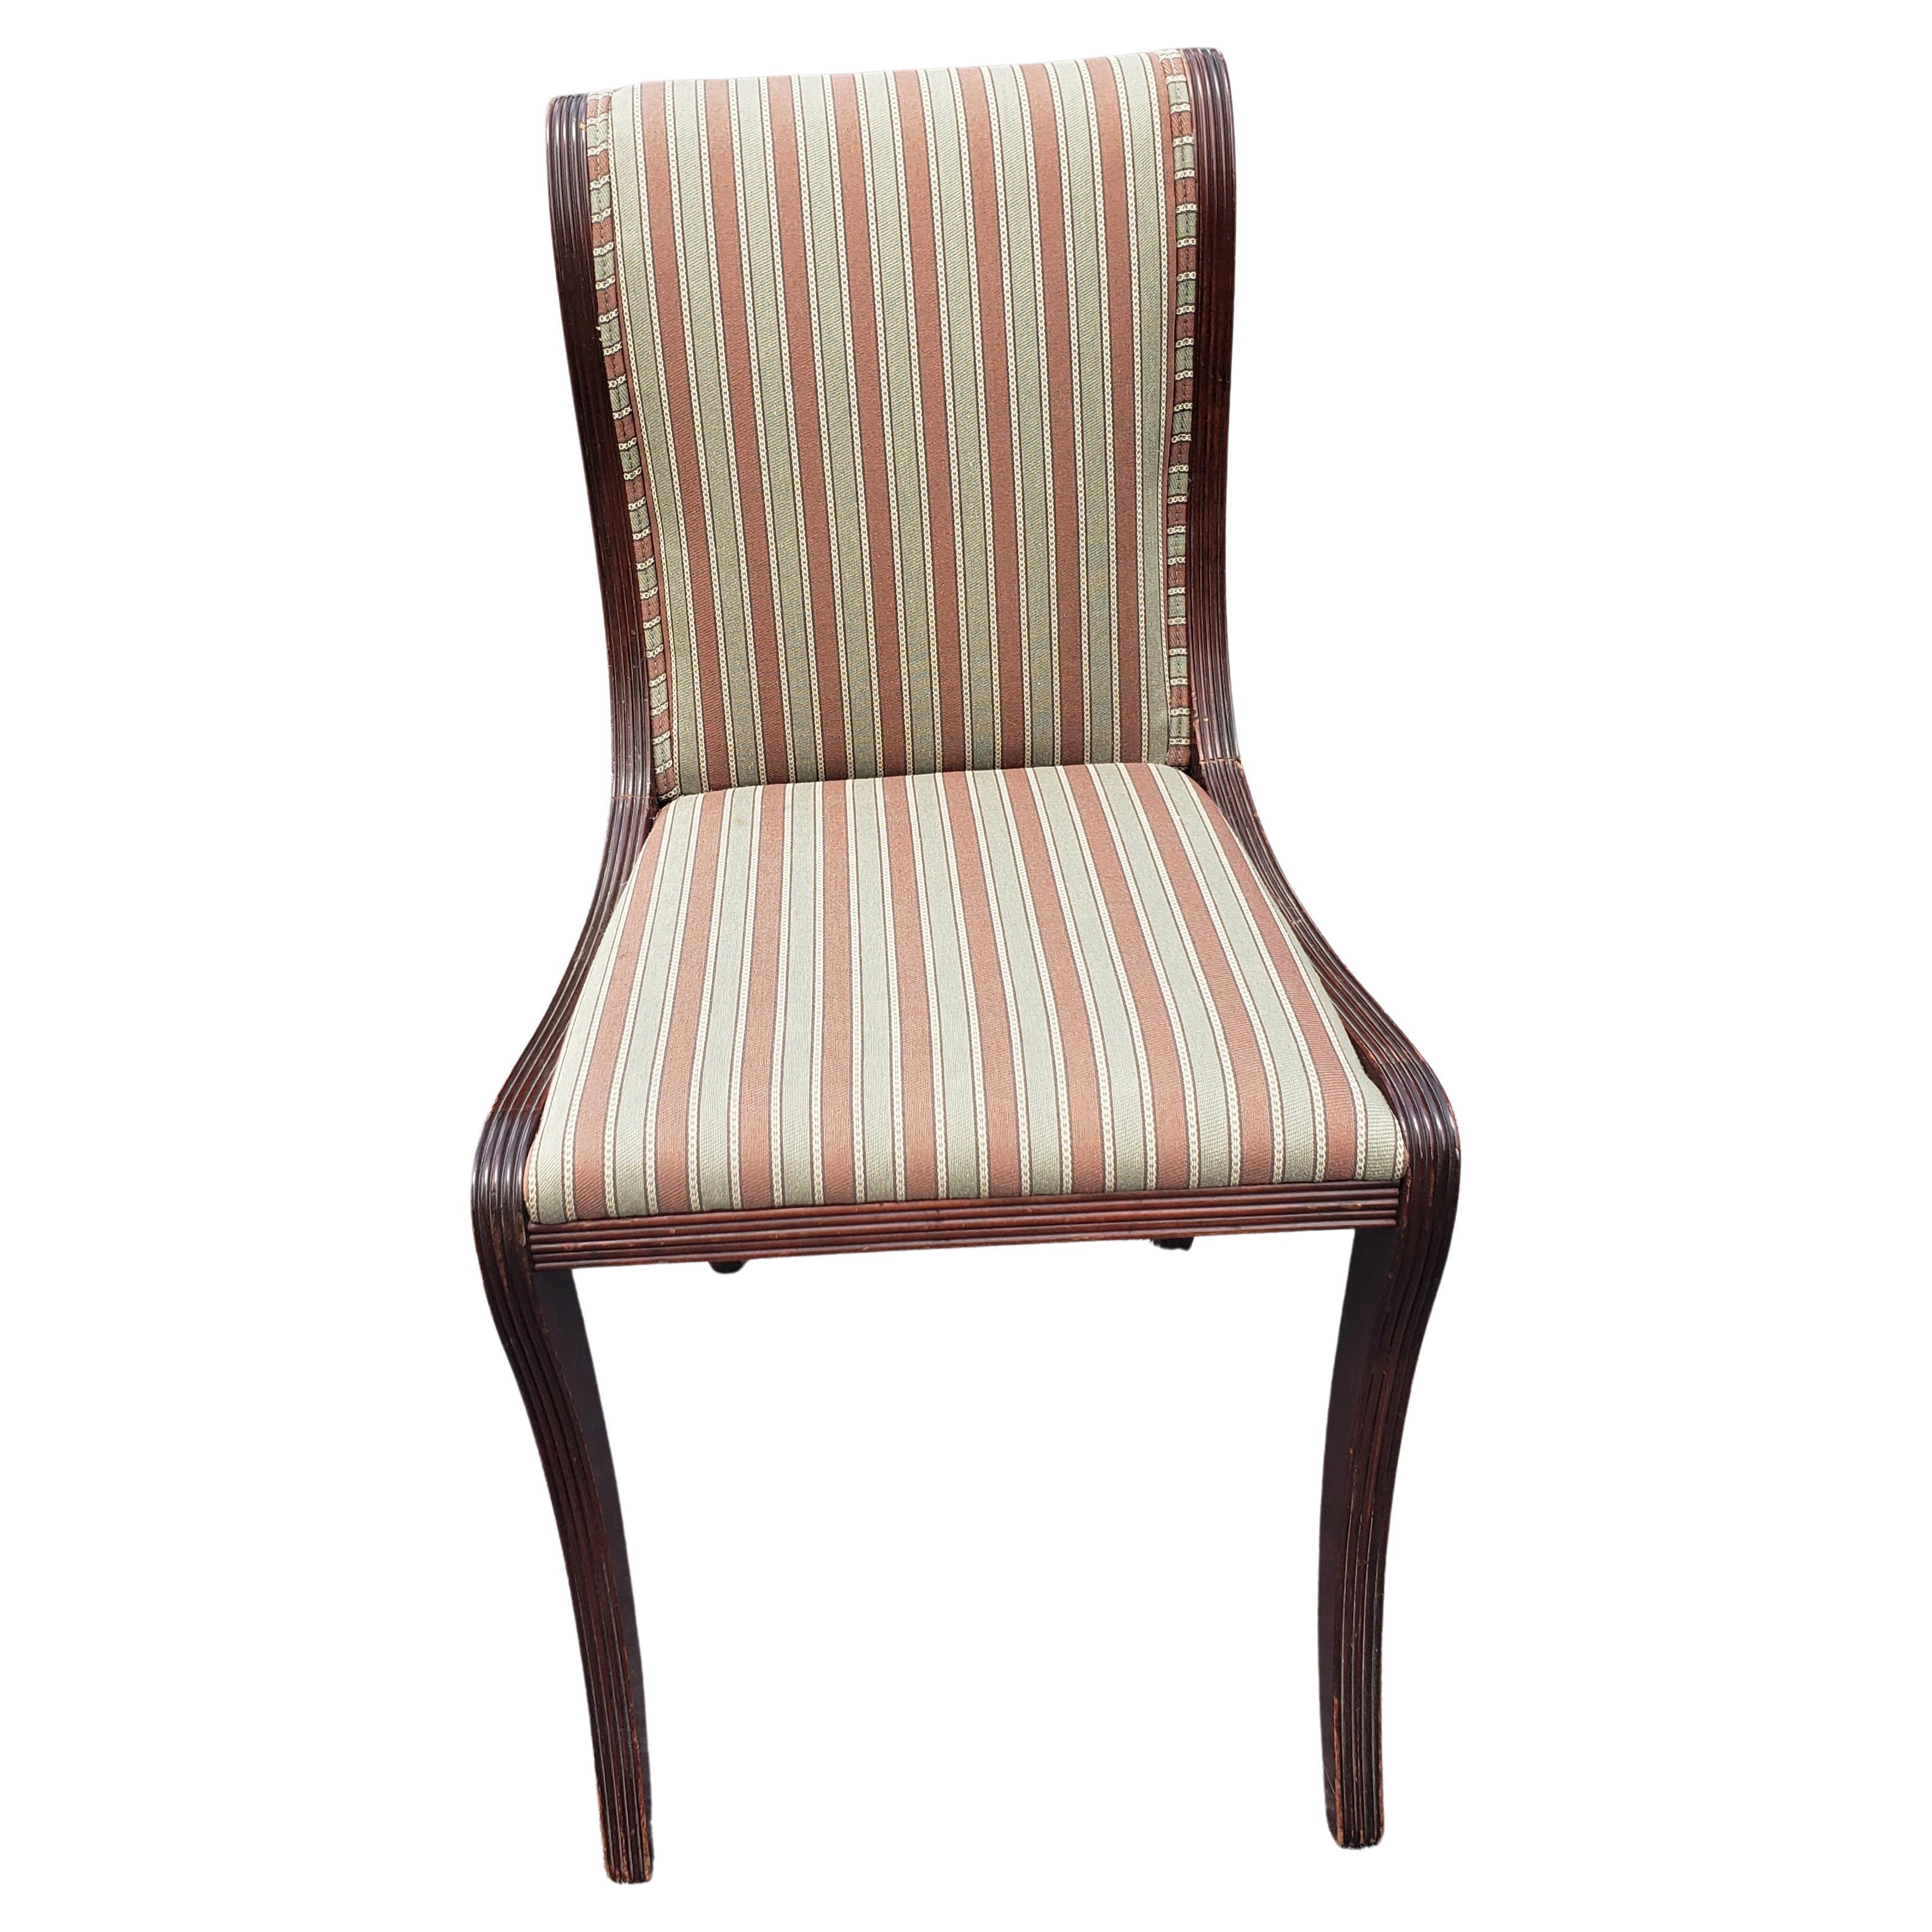 A Pair Duncan Phyfe Style Mahogany chairs with striped Upholstery. Very good vintage condition.
Chairs have been reupholstered down the road. Measure 17